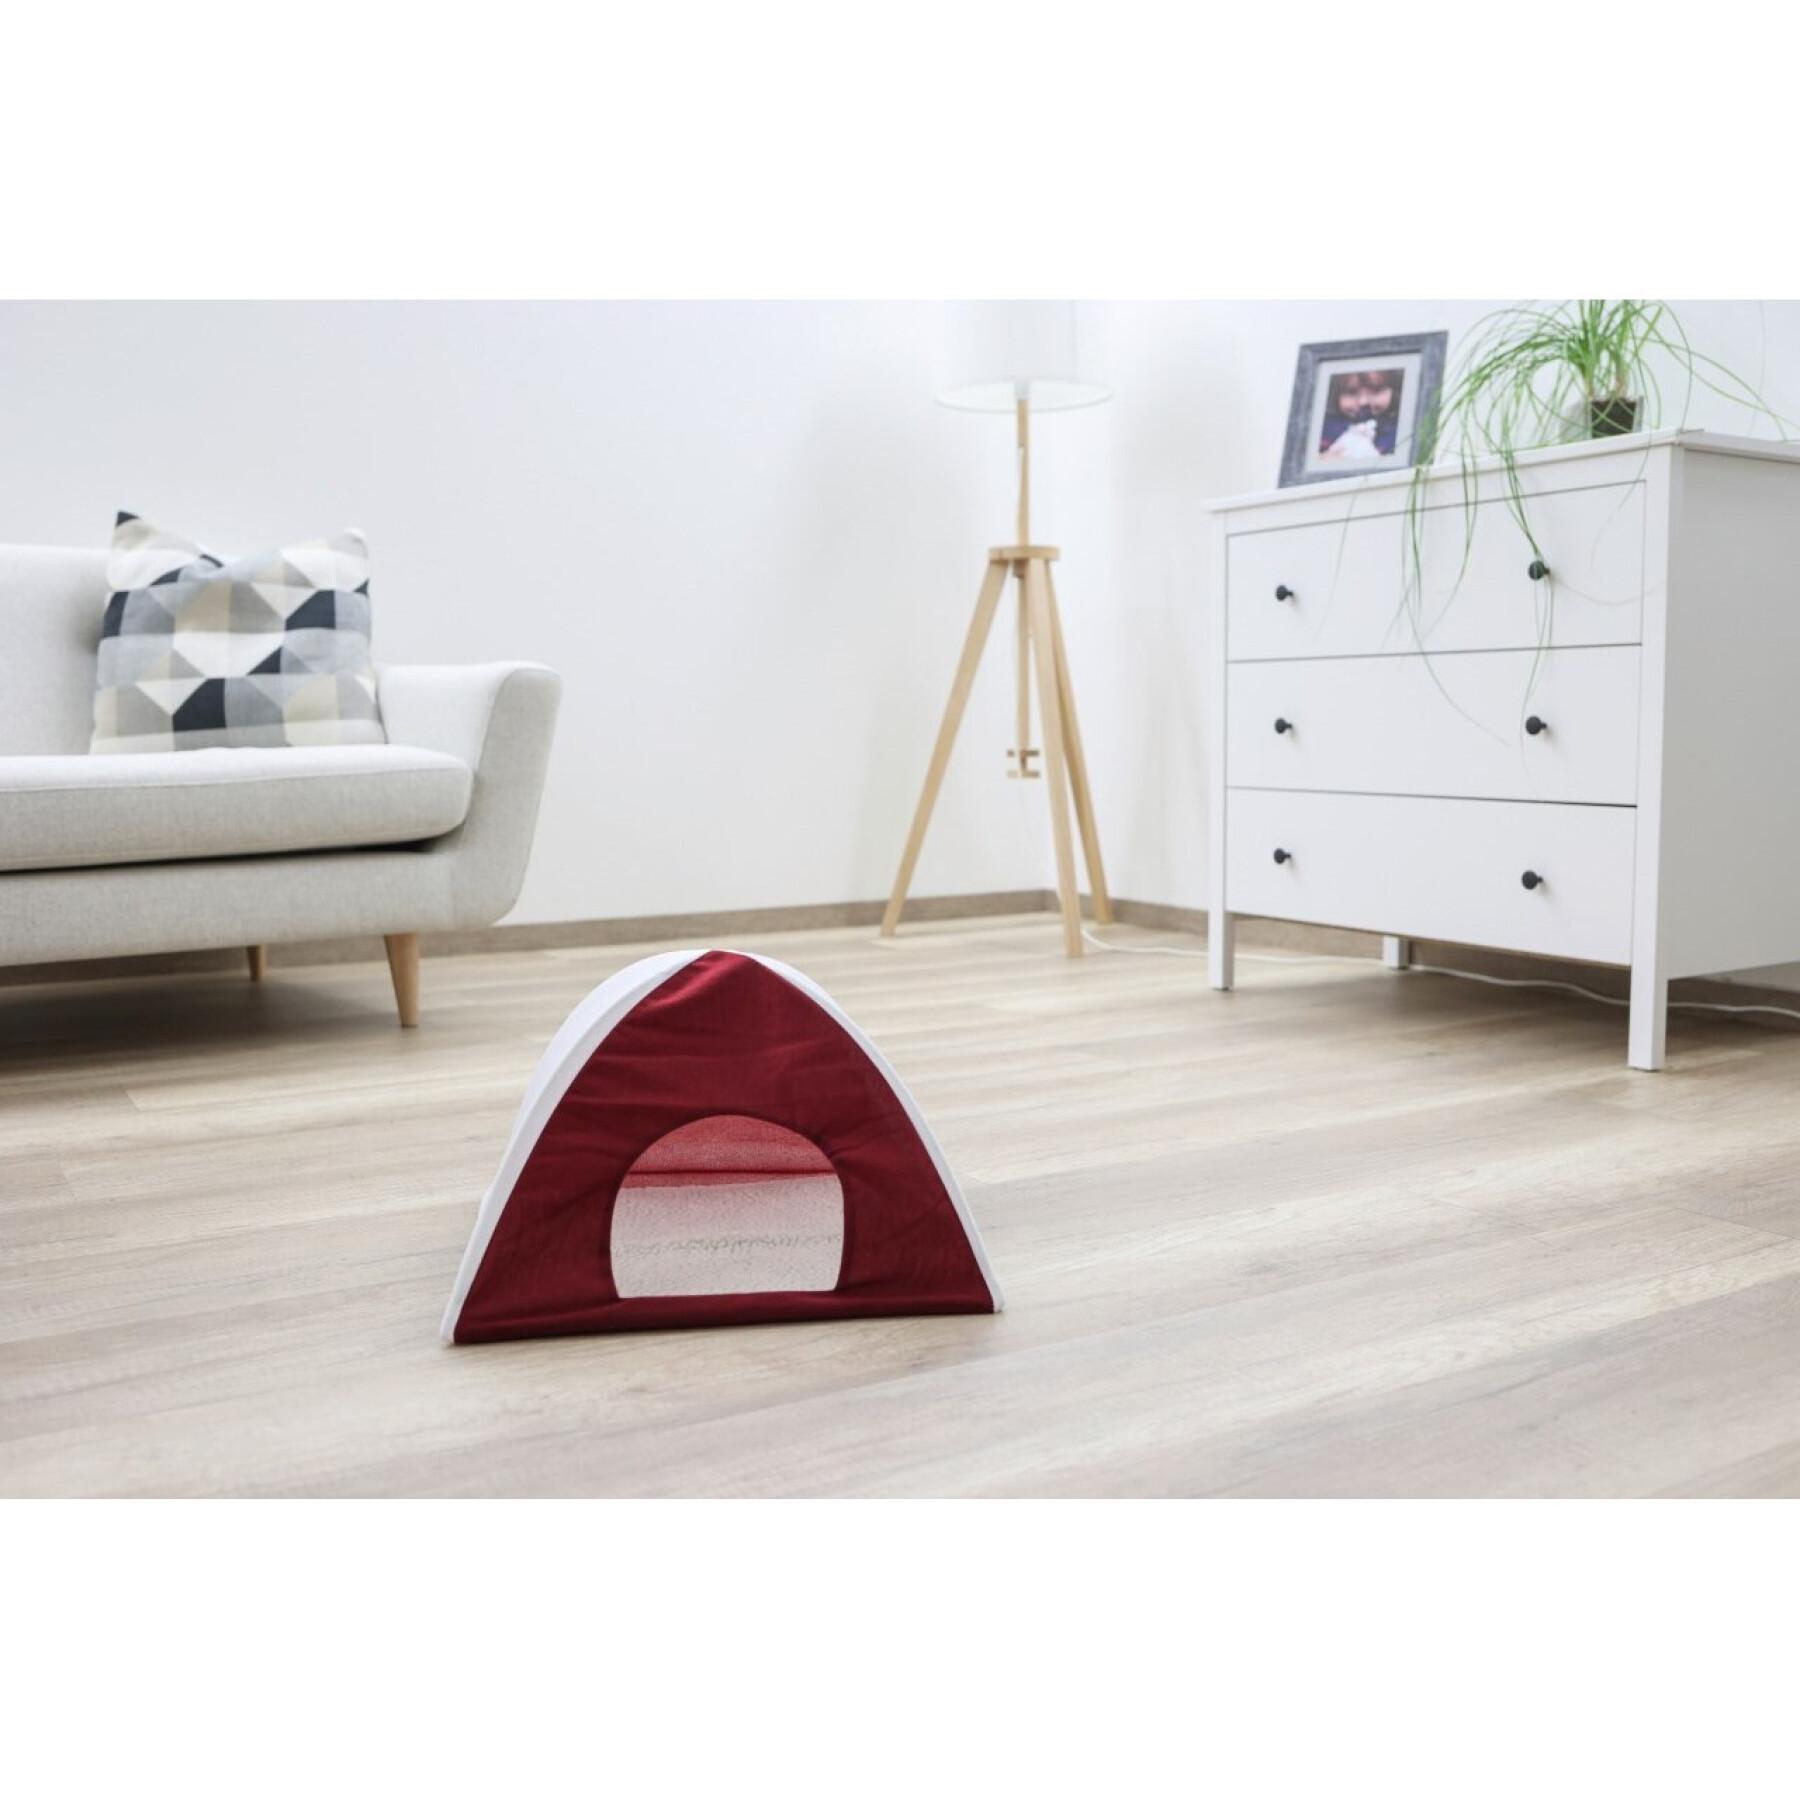 Igloo pour chat Kerbl Tipi